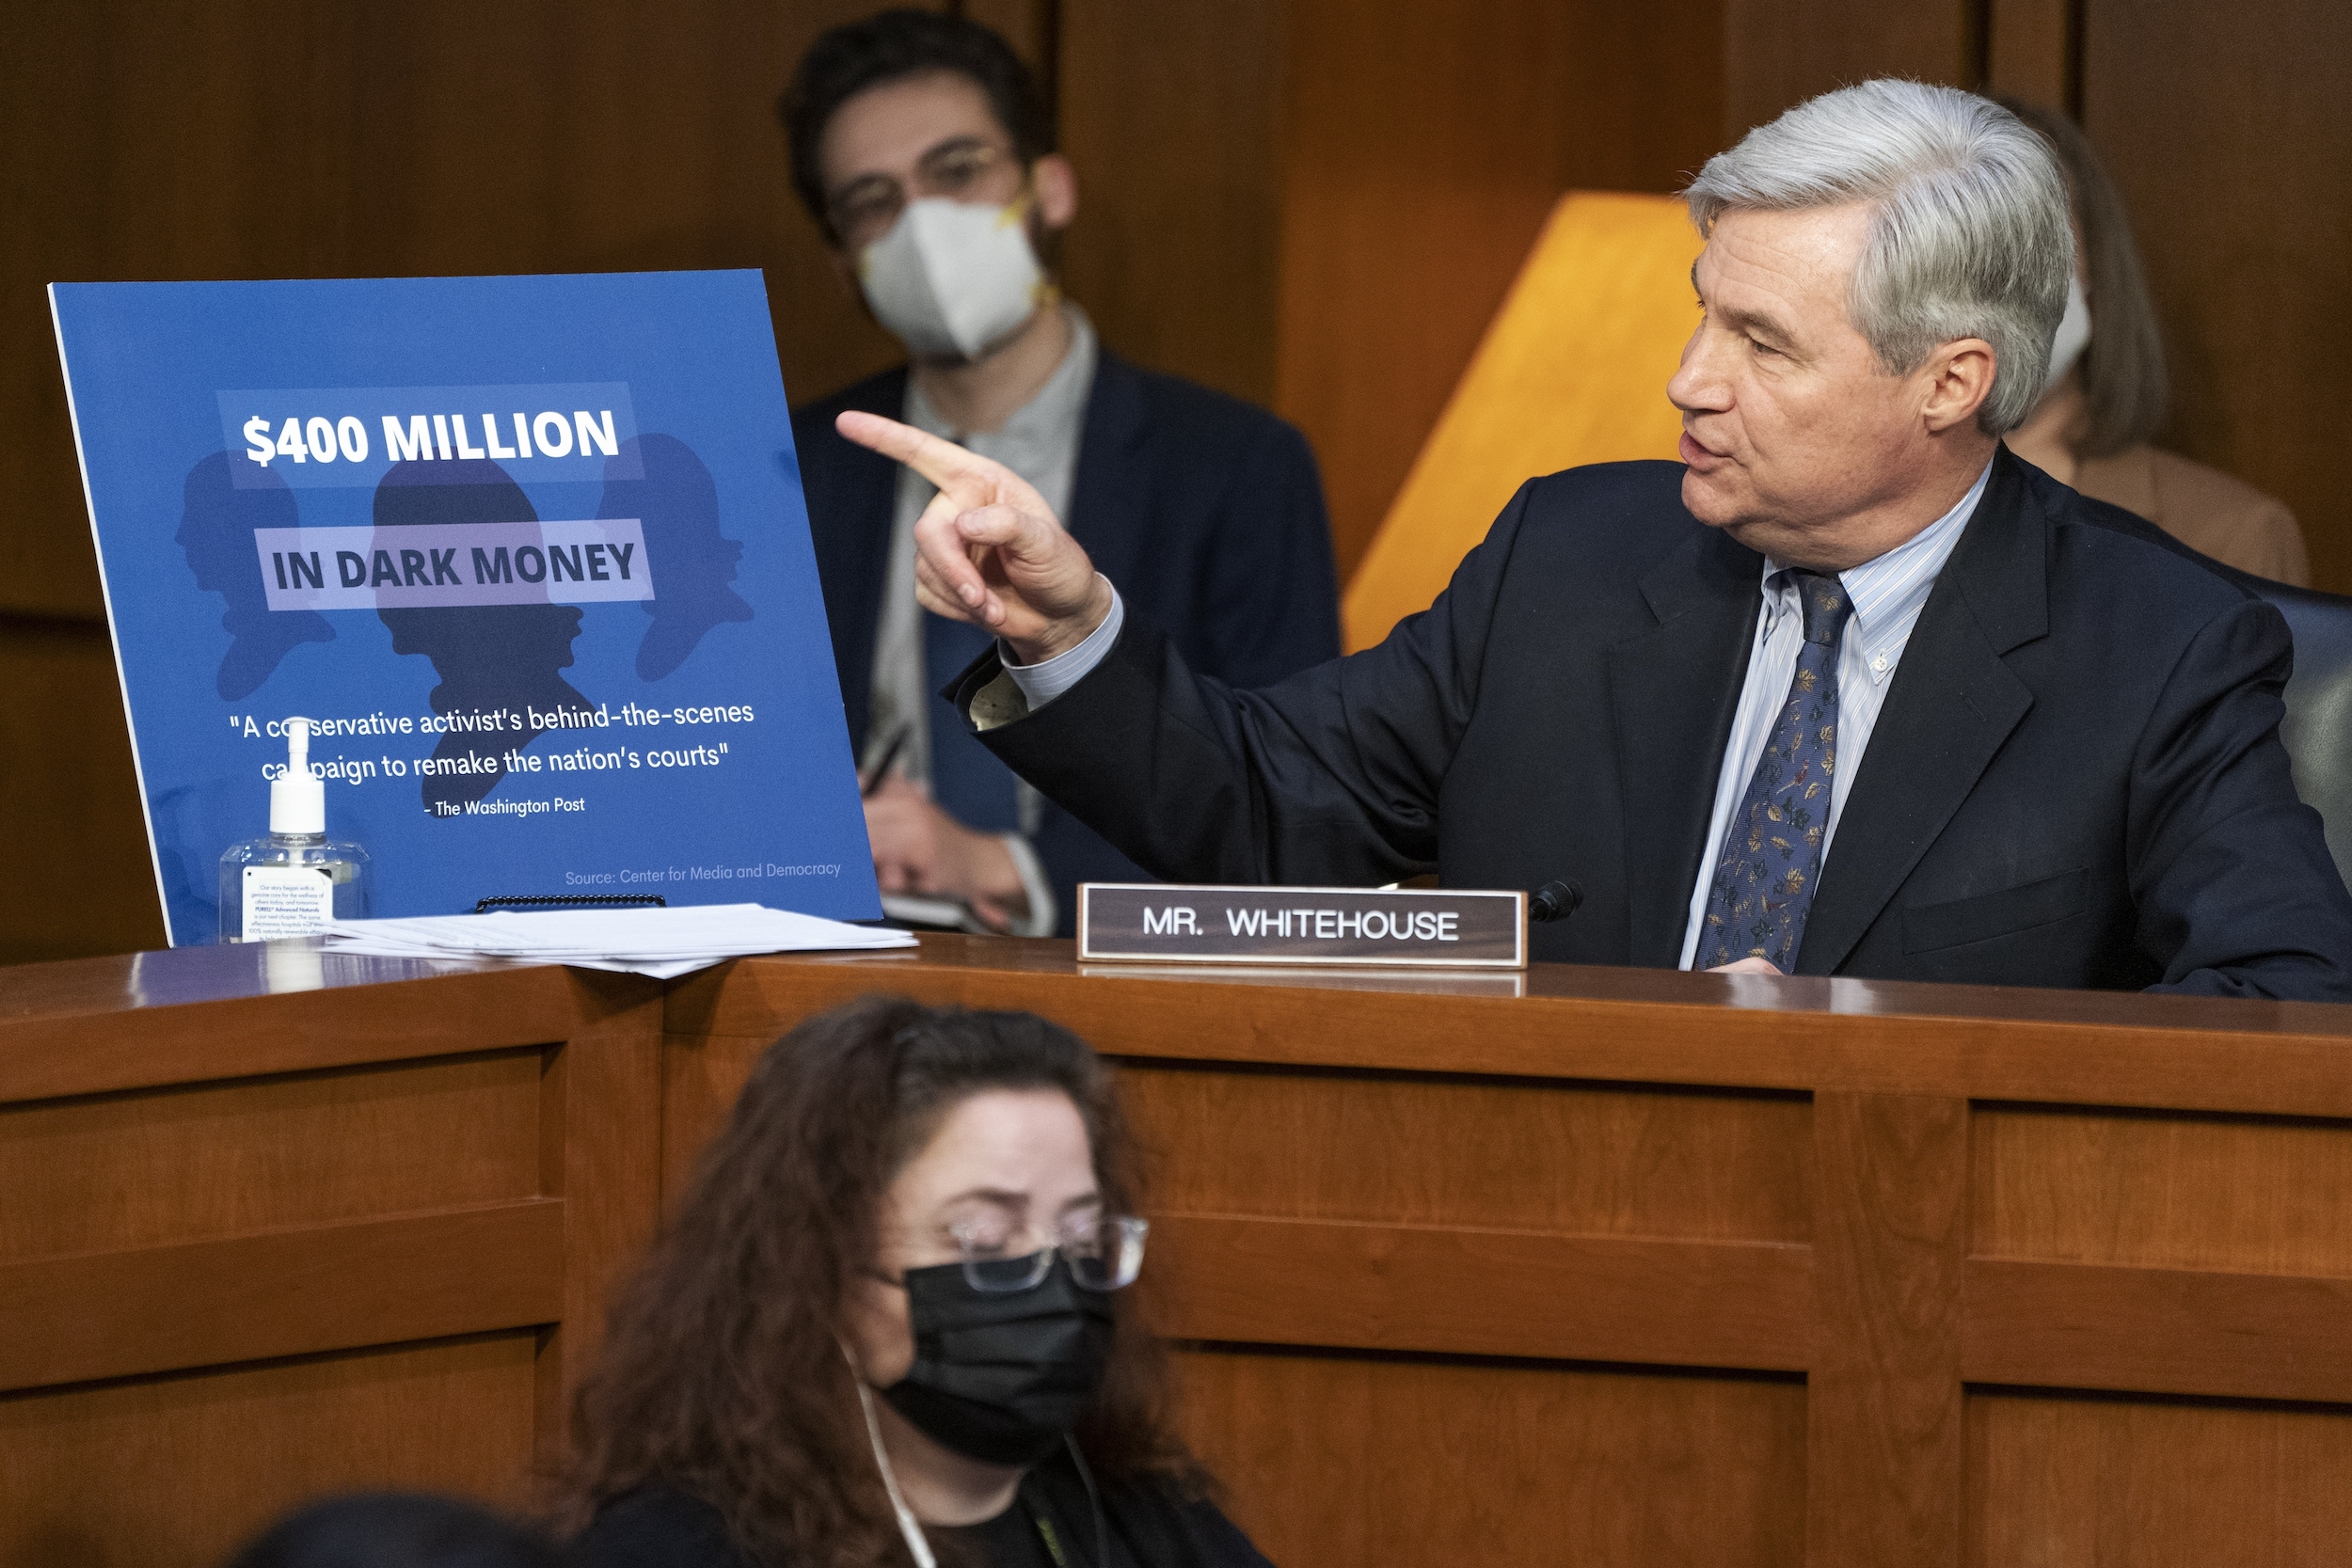 Sen. Sheldon Whitehouse, D-R.I., discusses “dark money” while speaking during the nomination hearing of Supreme Court nominee Ketanji Brown Jackson, Tuesday, March 22, 2022, to the Senate Judiciary Committee on Capitol Hill in Washington.